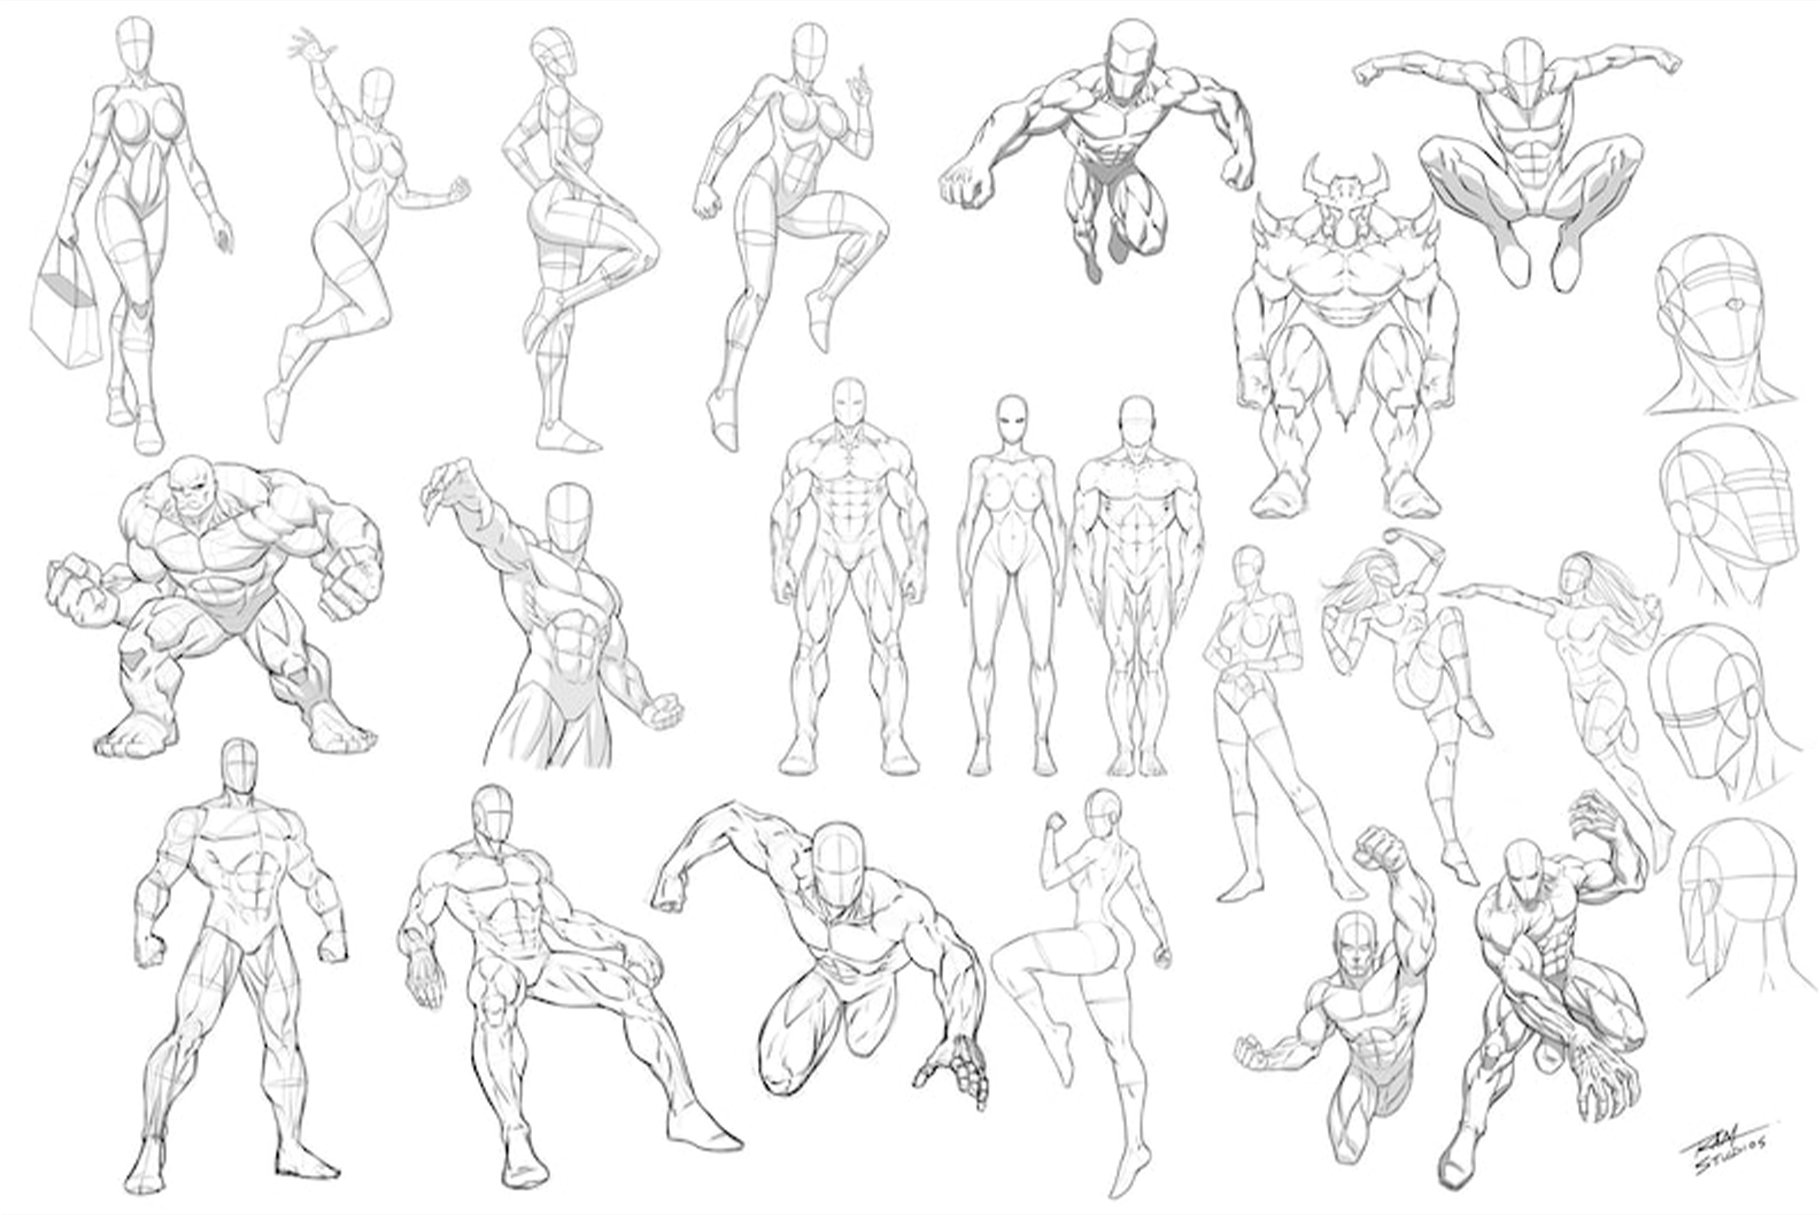 ArtStation – 380+ Epic Flying Pose Reference Pictures by Grafit Studio |  GFXDomain Blog